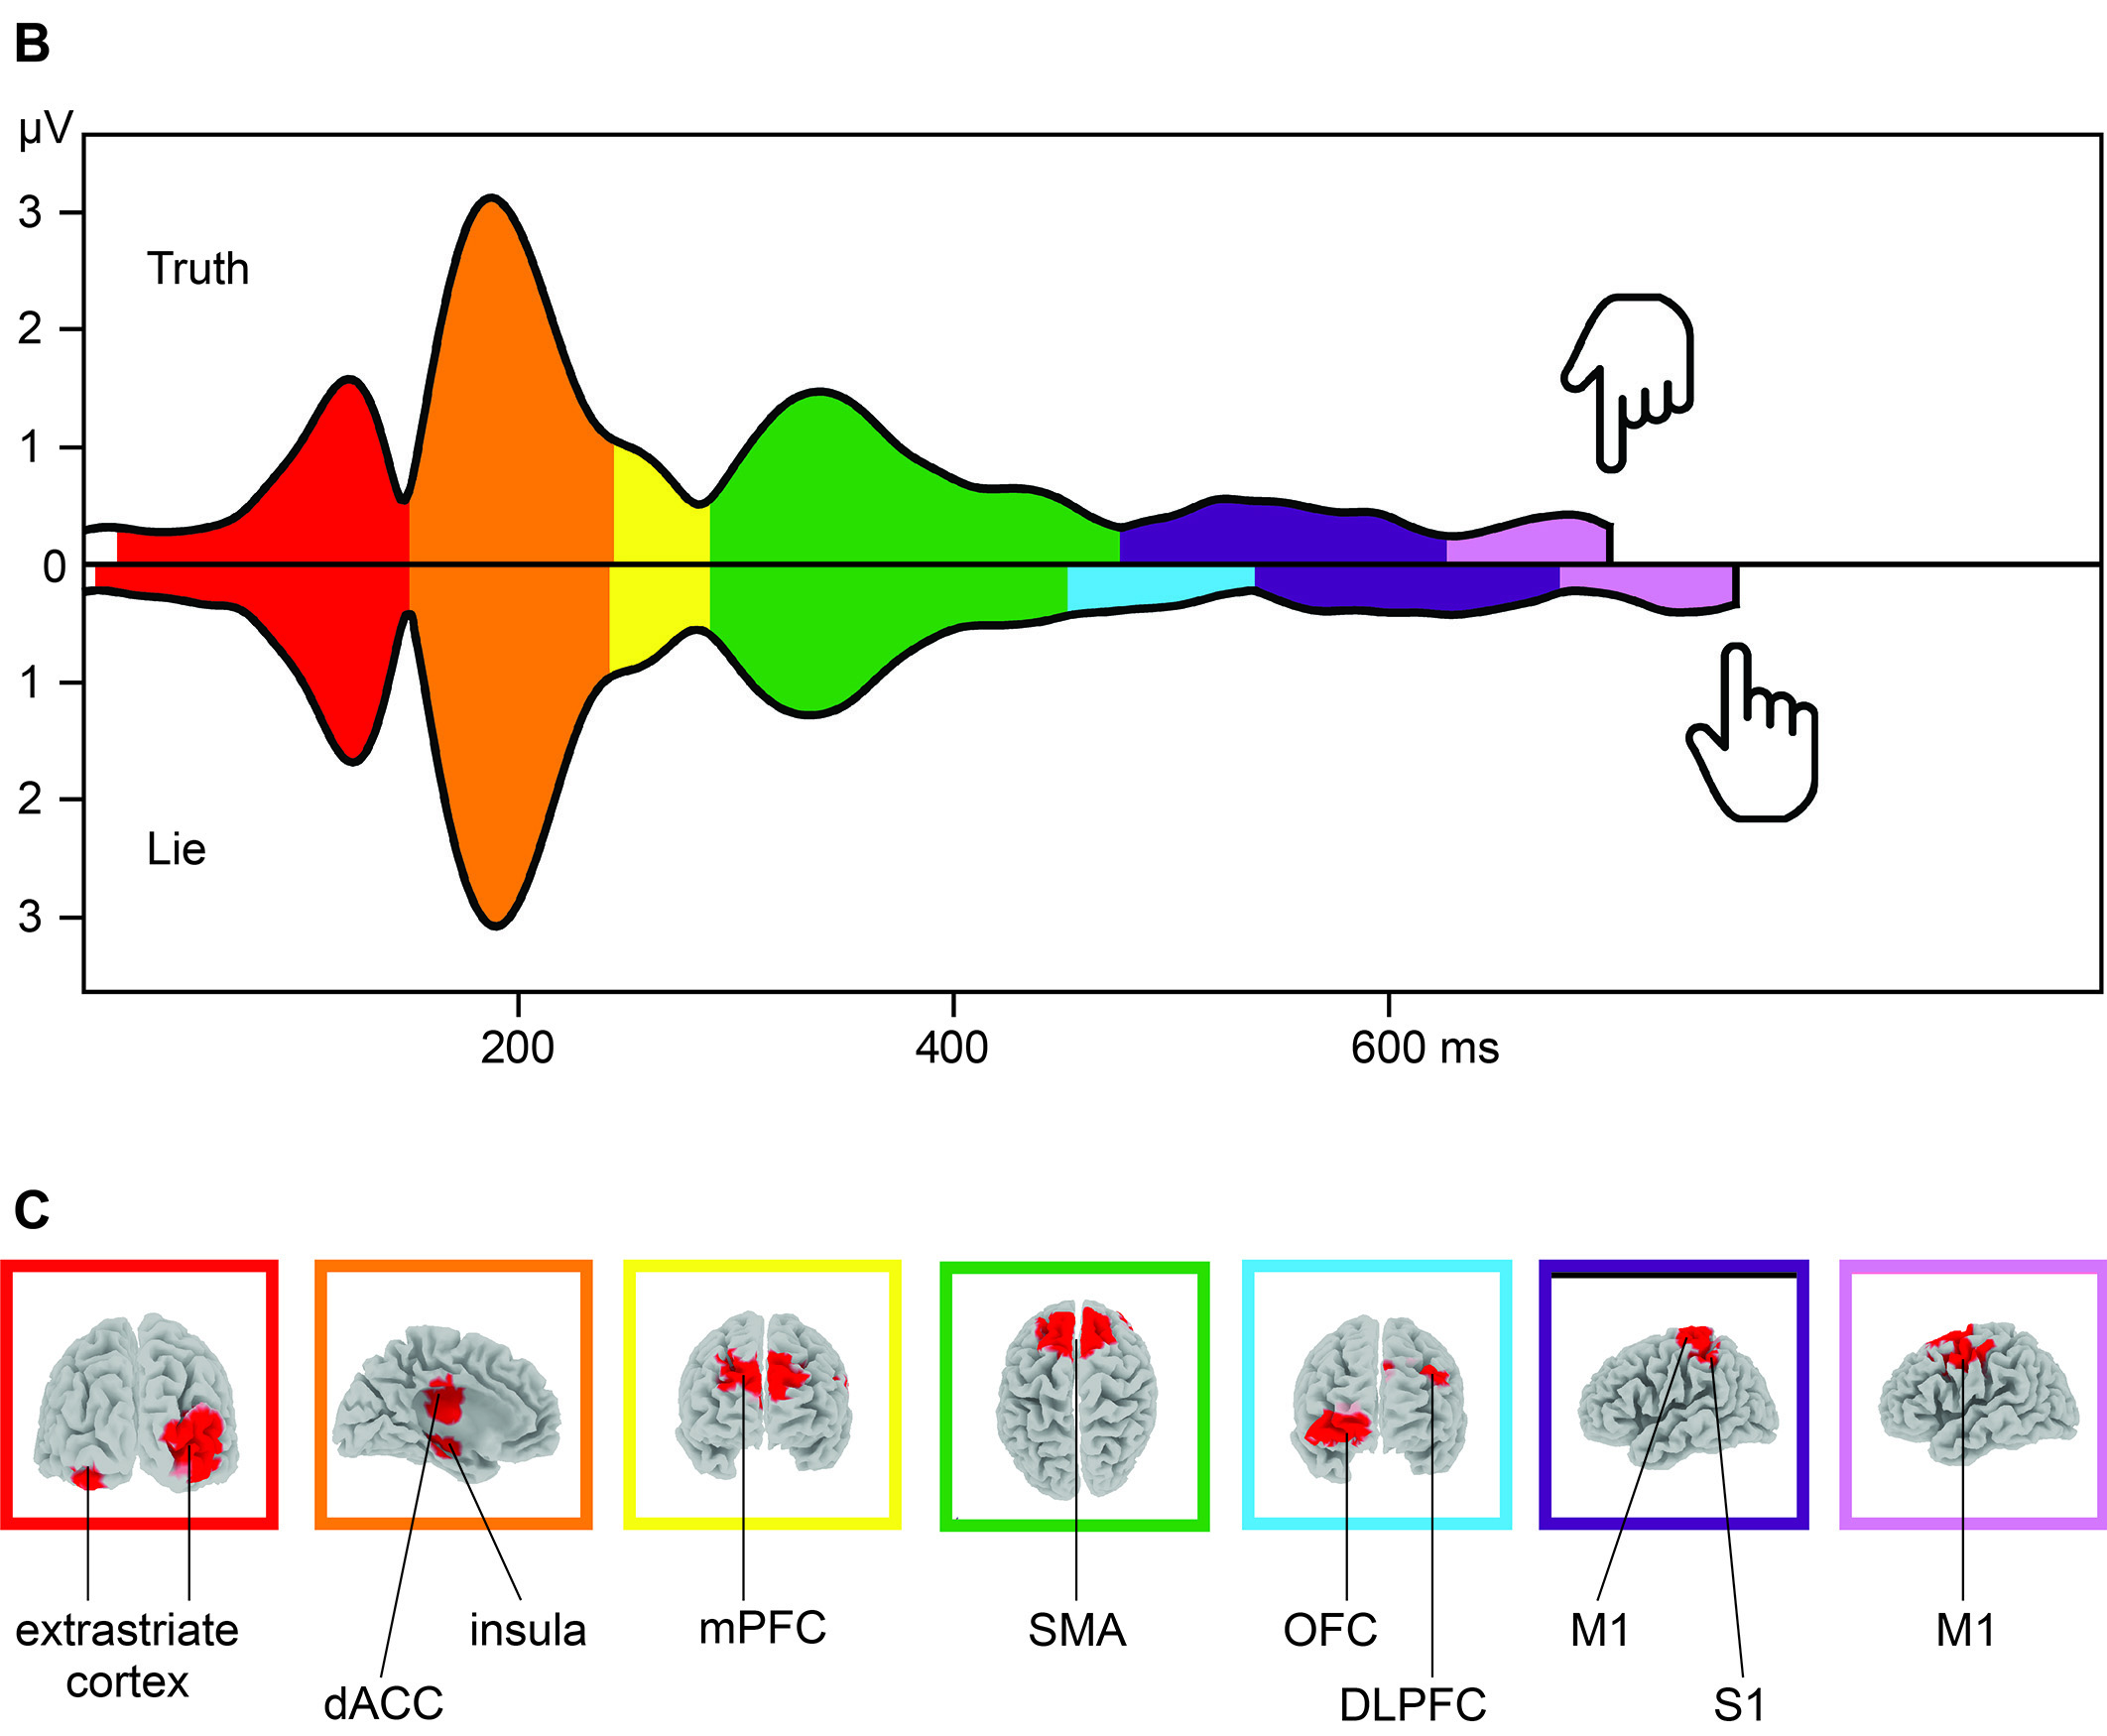 The figure visualizes the microstate approach, which has been applied in this EEG paper. Main result is an additional microstate localized in the prefrontal cortex when people lie.